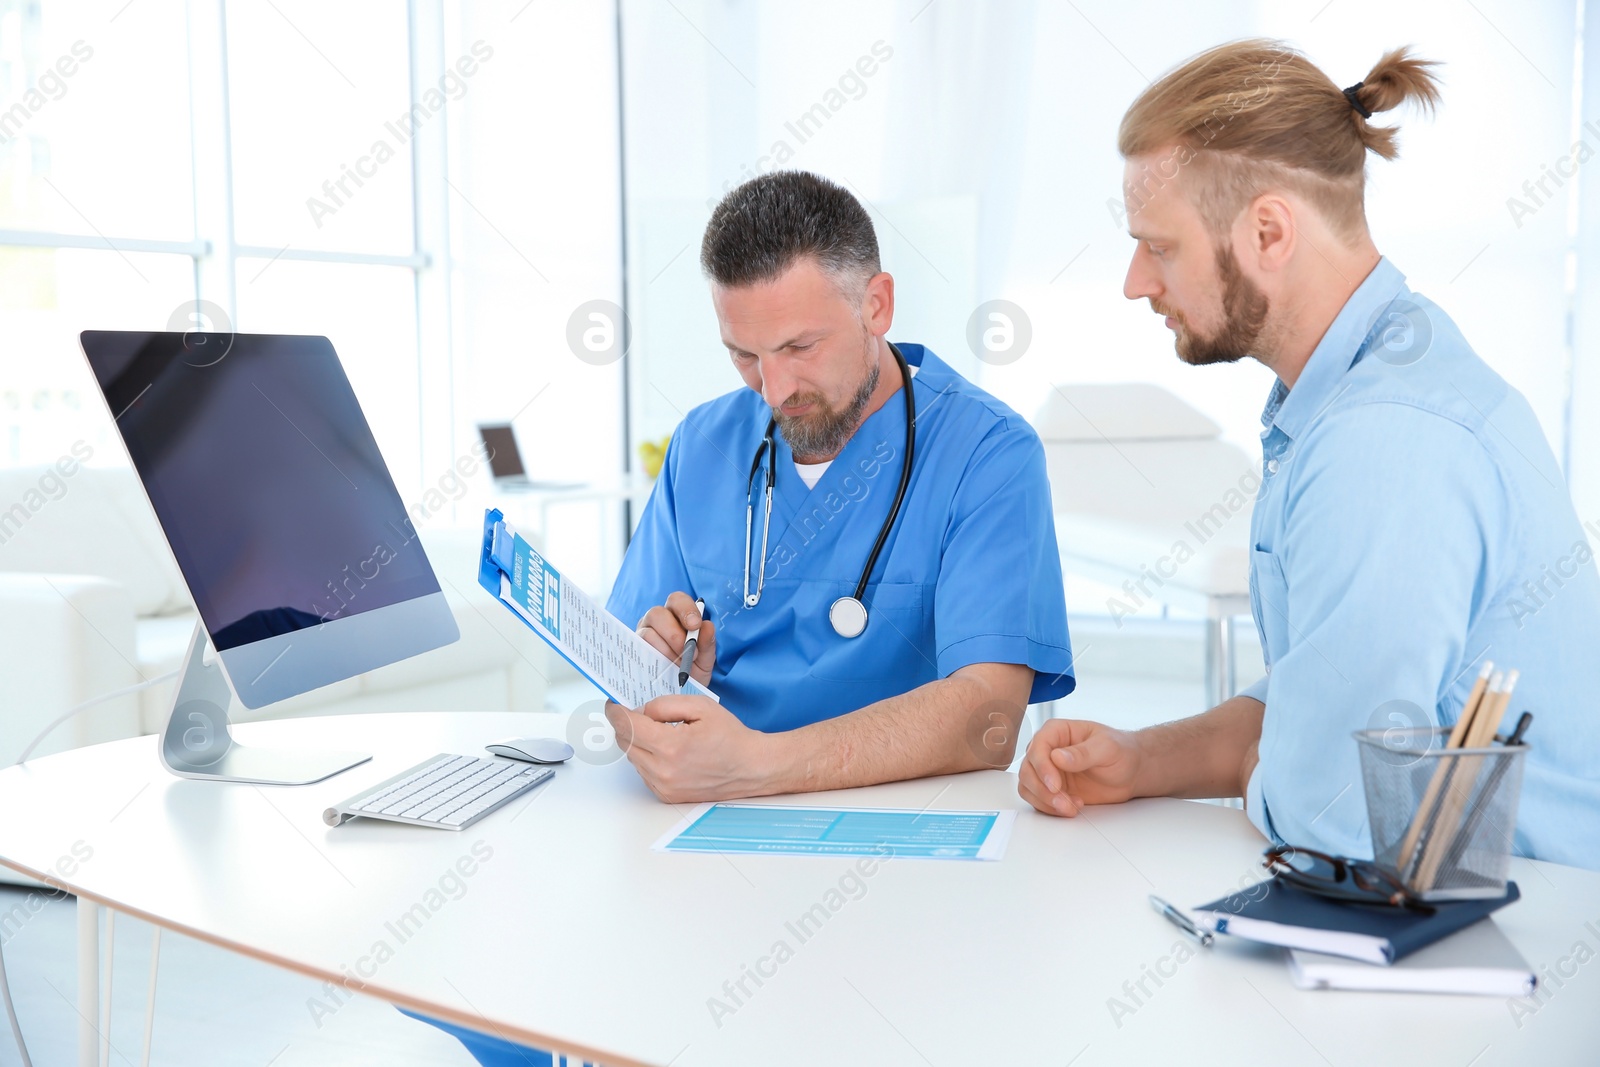 Photo of Man with health problems visiting urologist at hospital